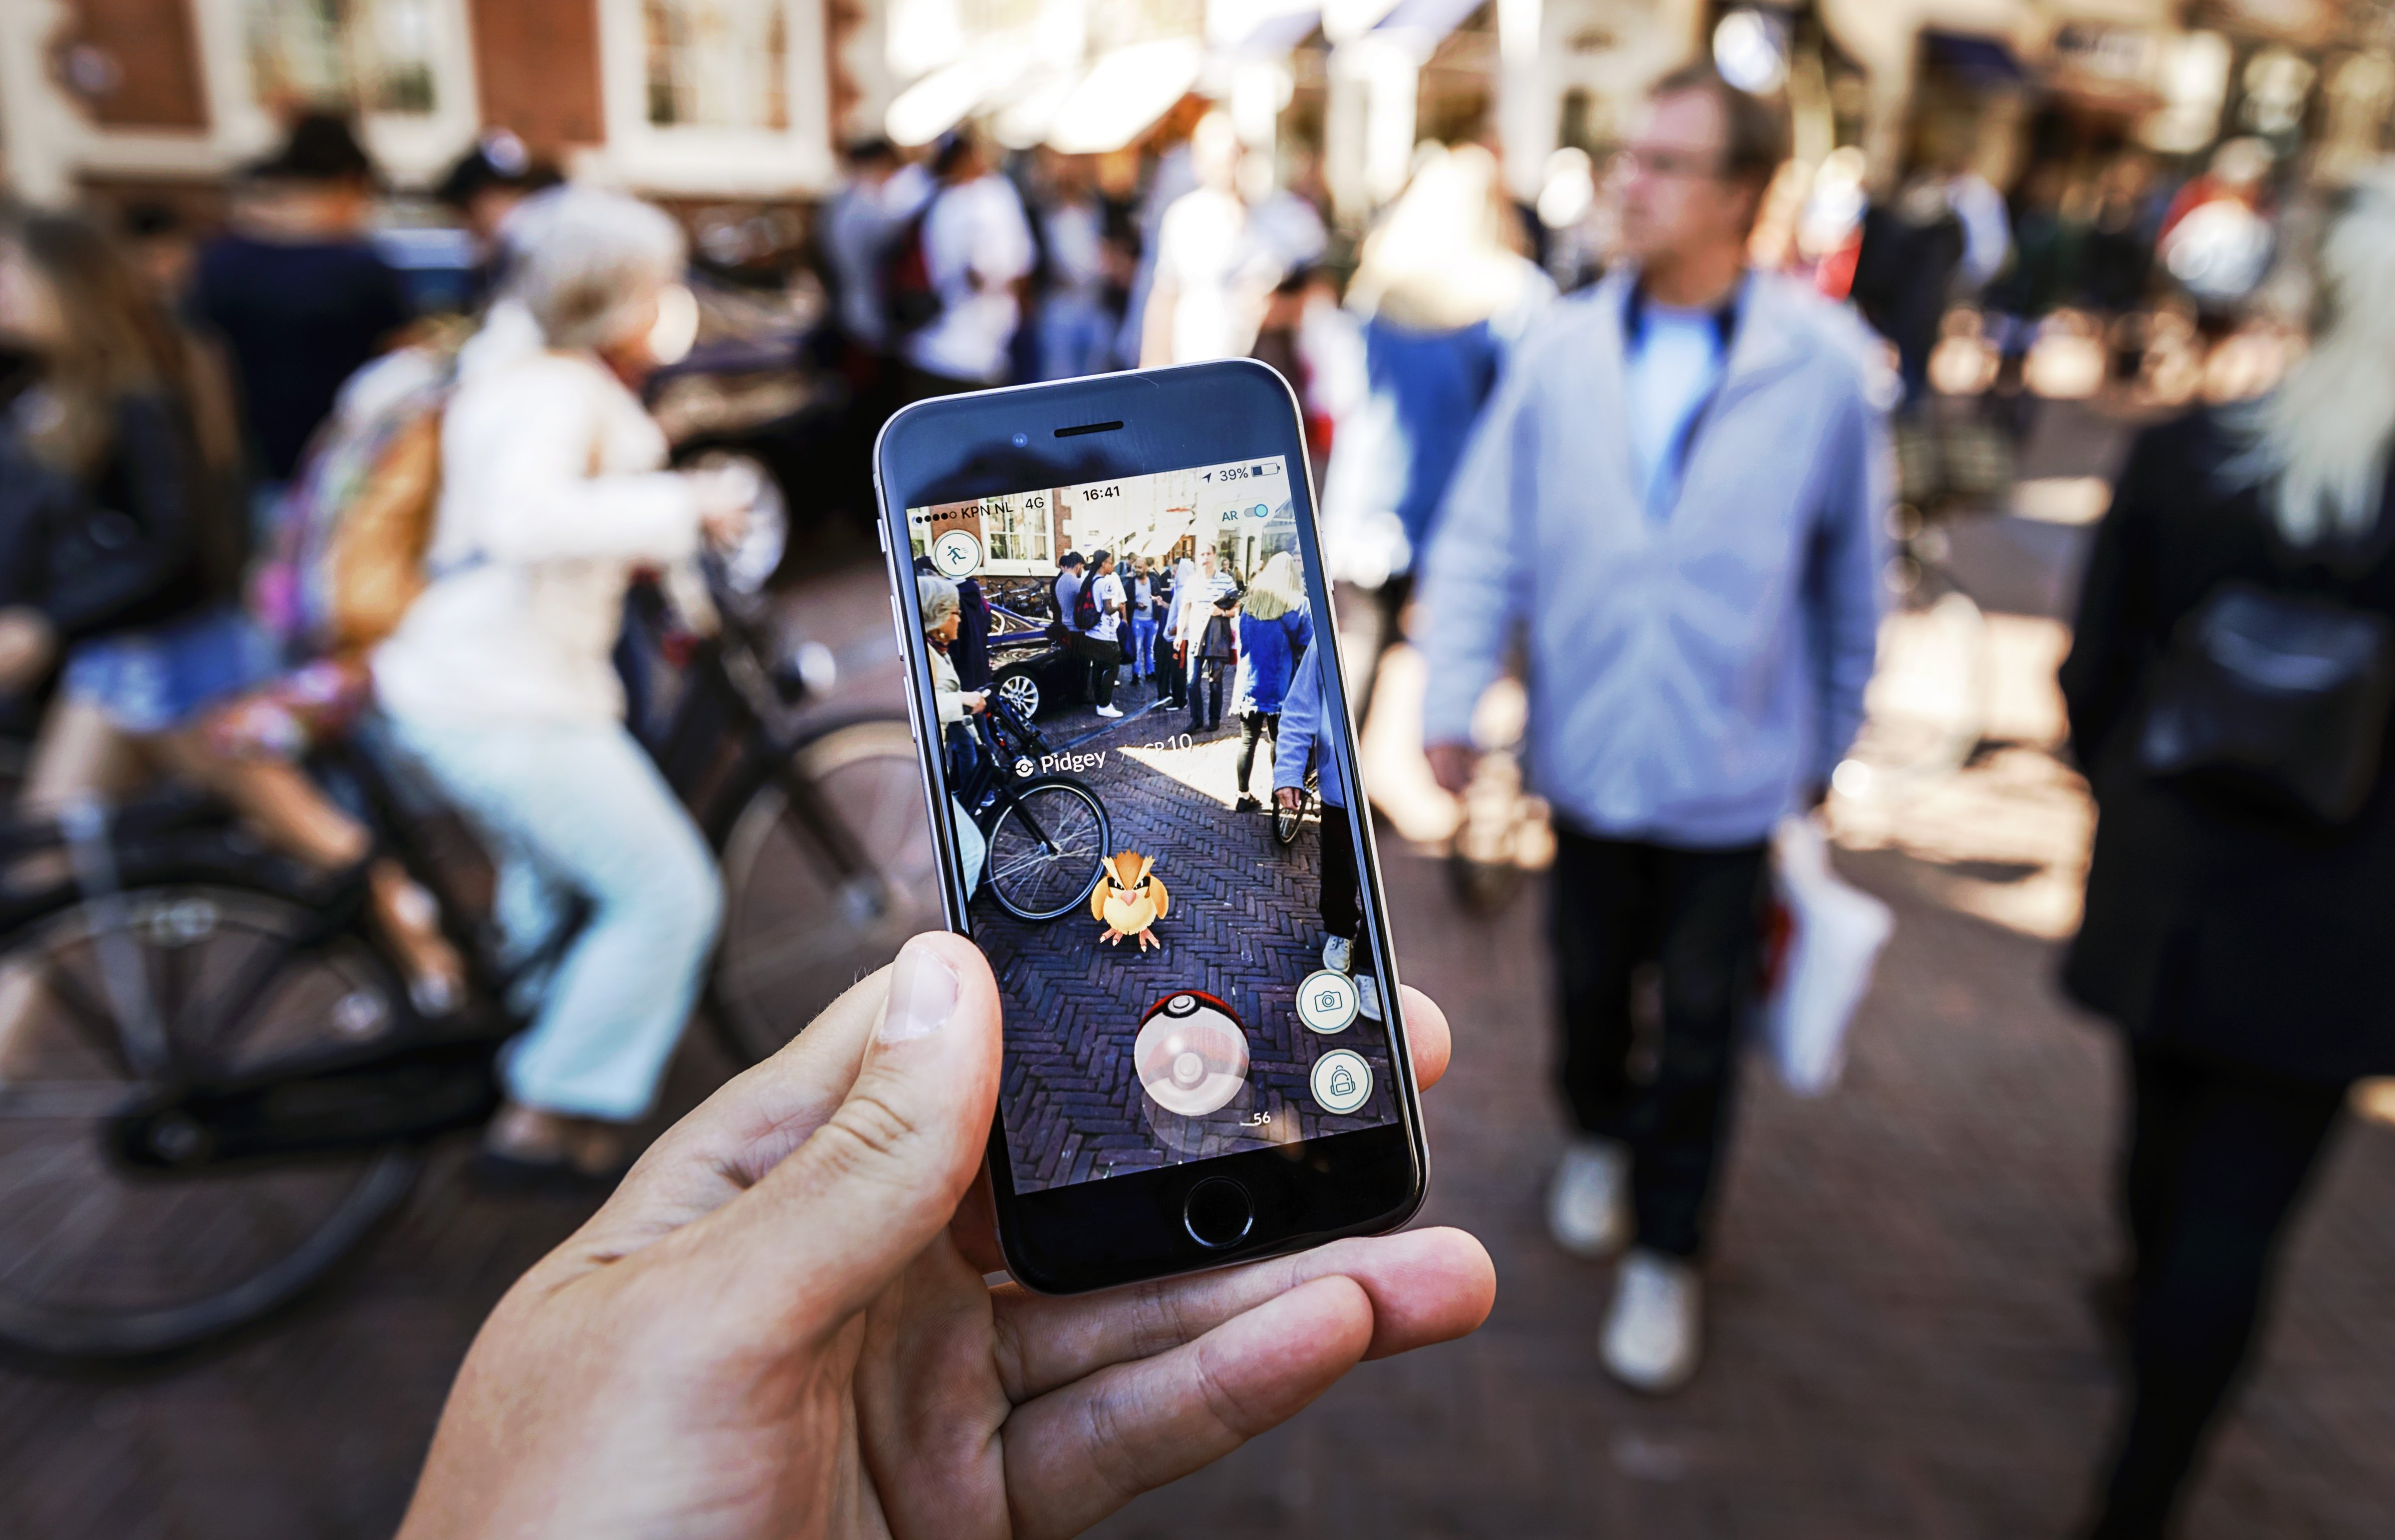 Gamers play with the Pokemon Go application on their mobile phone, at the Grote Markt in Haarlem, on July 13, 2016. (Remko De Waal—AFP/Getty Images)